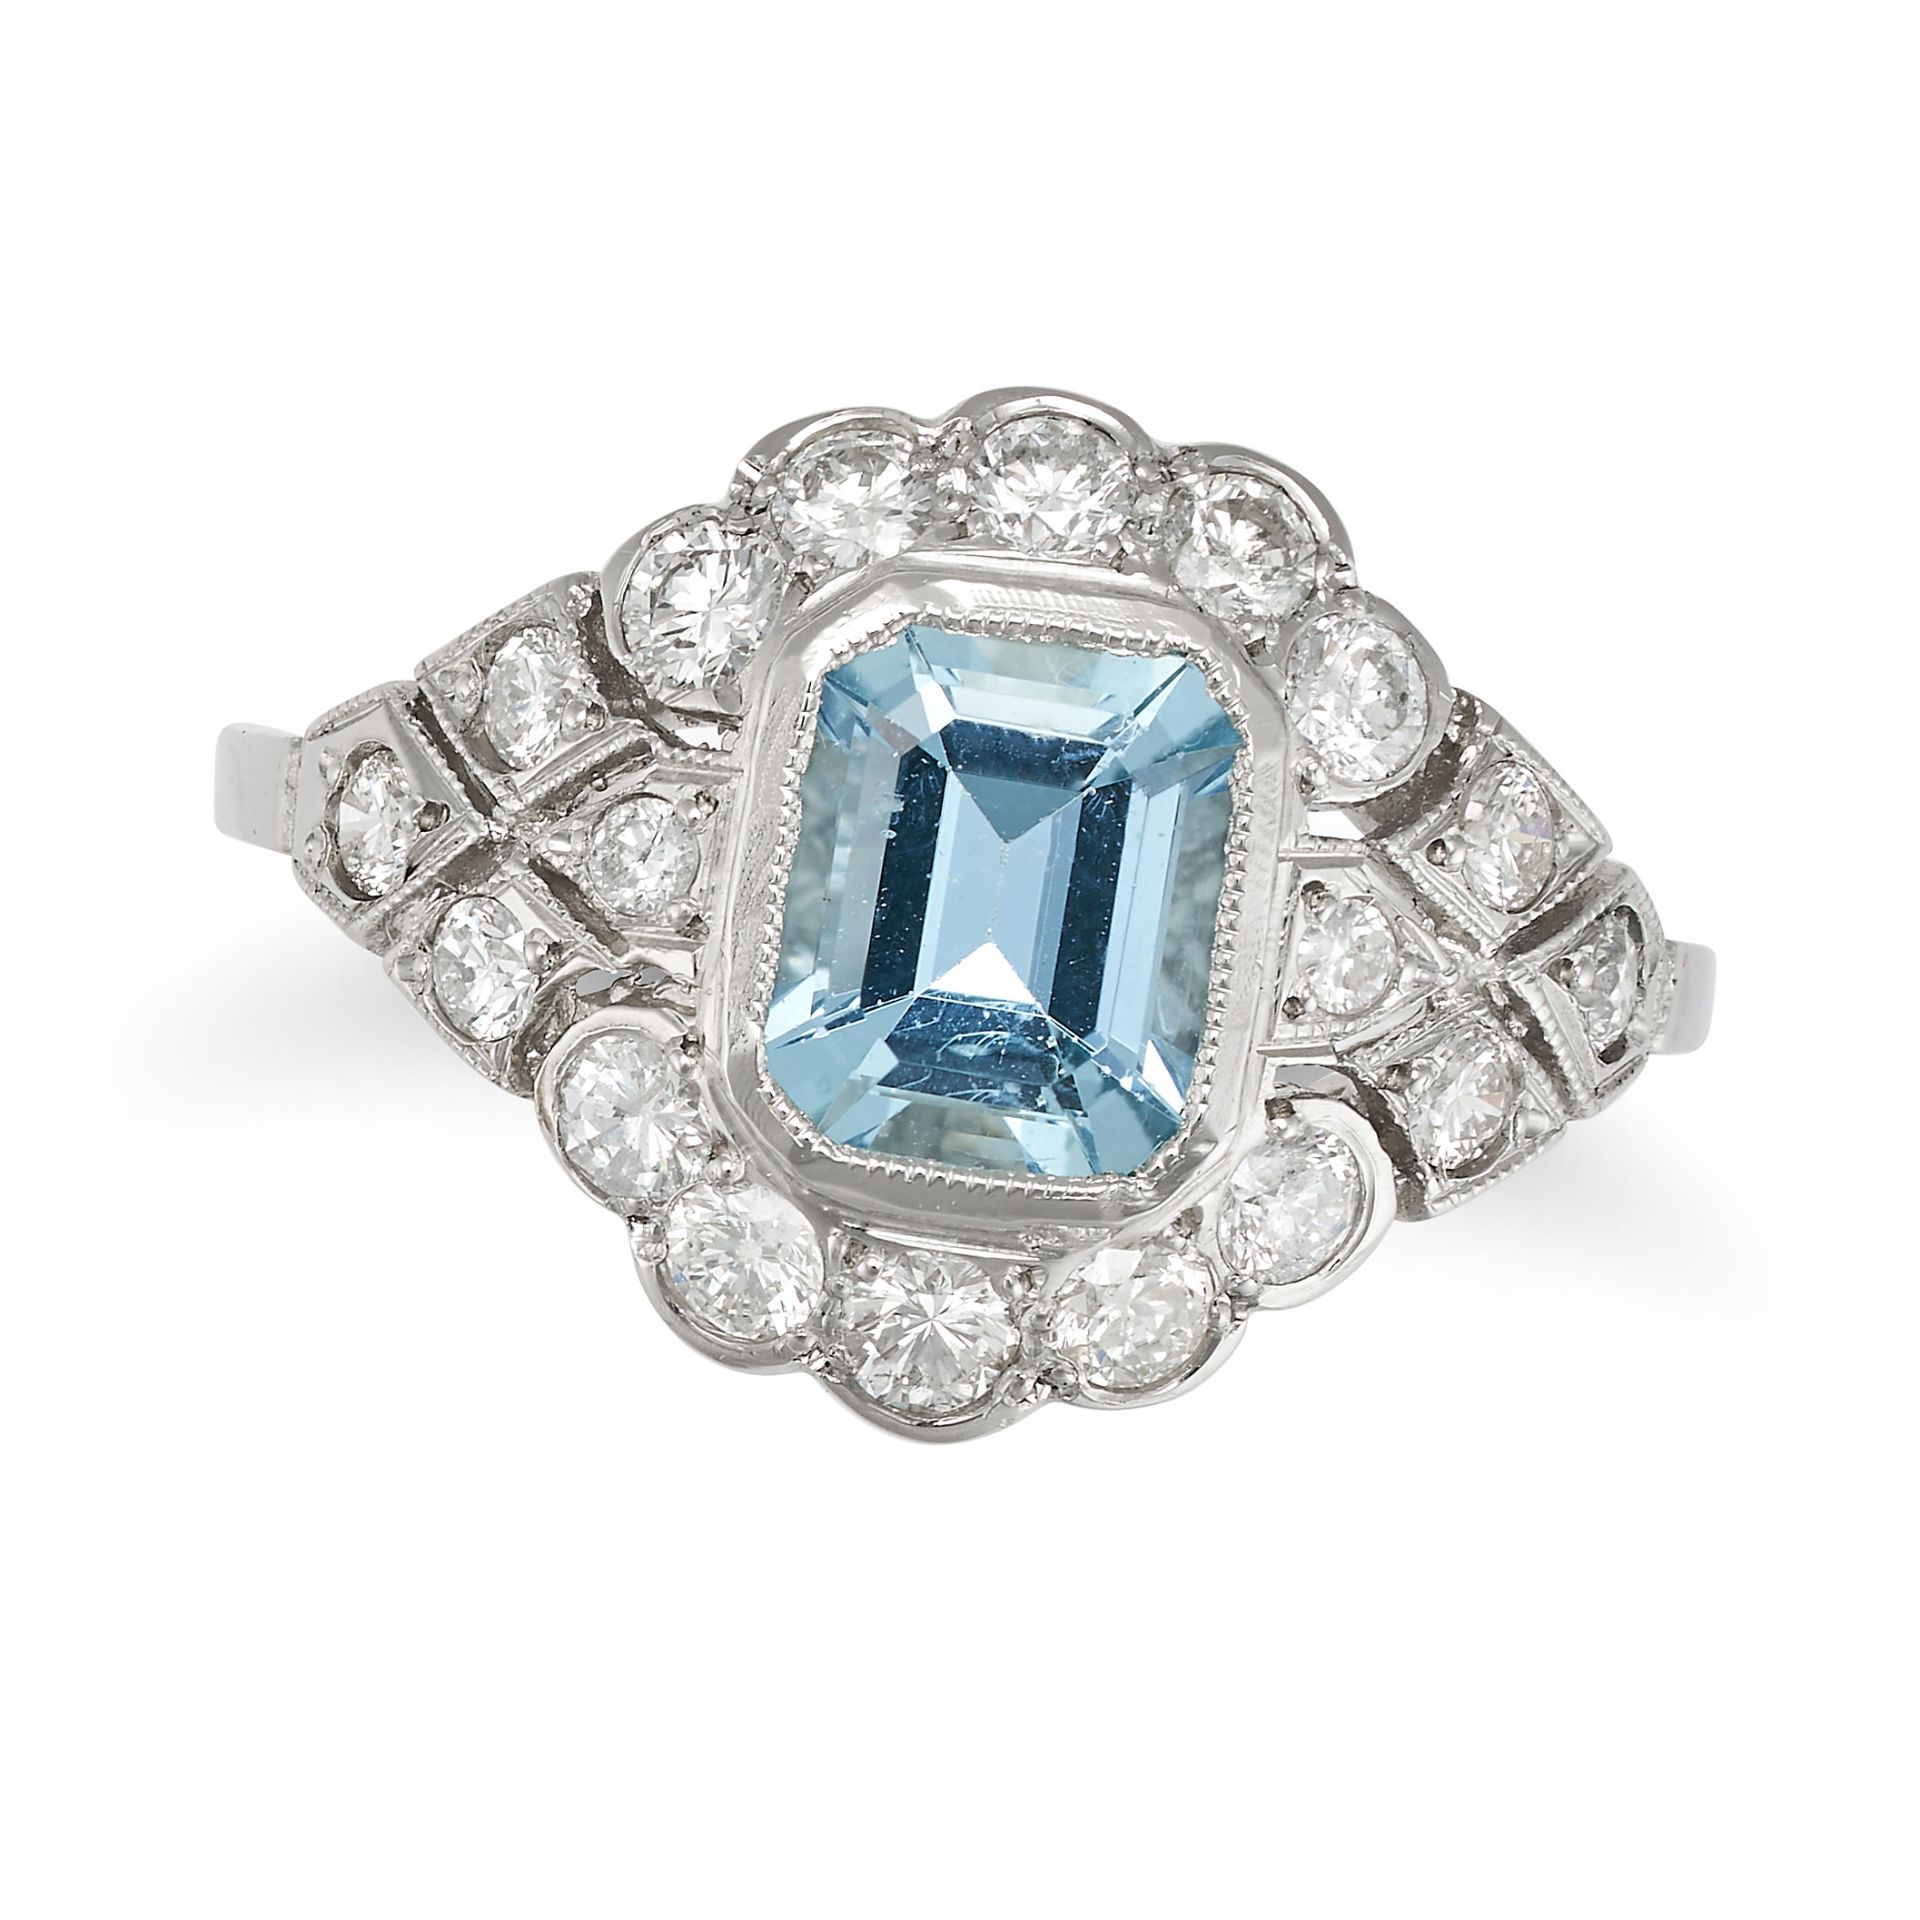 AN AQUAMARINE AND DIAMOND RING in platinum, set with an octagonal step cut aquamarine accented by...